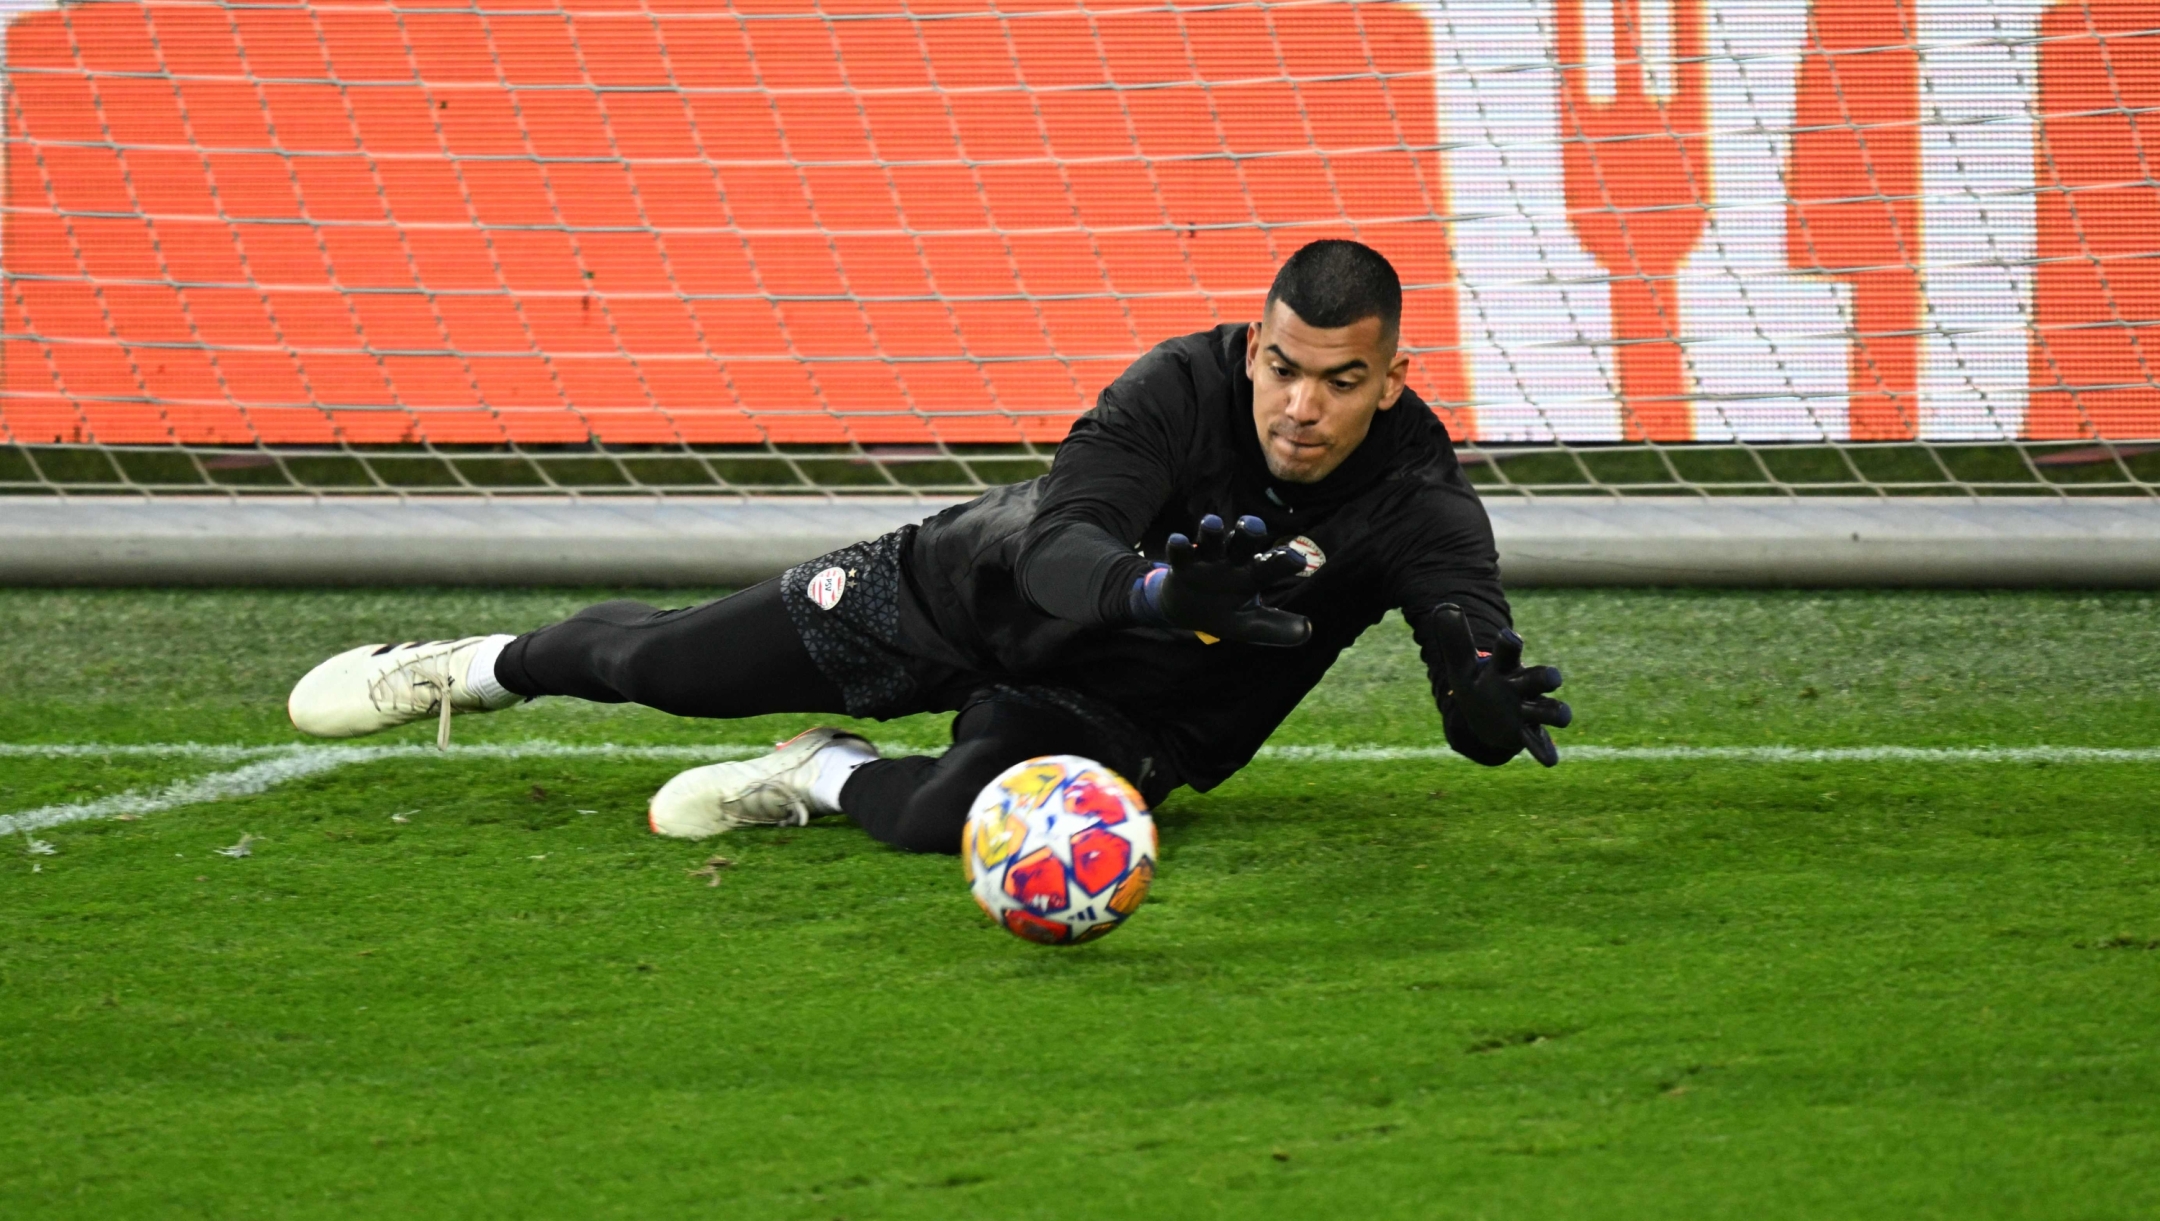 PSV Eindhoven's Argentine goalkeeper #01 Walter Benitez makes a save during a training session on the eve of their UEFA Champions League last 16 second leg football match against Borussia Dortmund at the Signal Iduna stadium in Dortmund, western Germany on March 12, 2024. (Photo by Ina FASSBENDER / AFP)